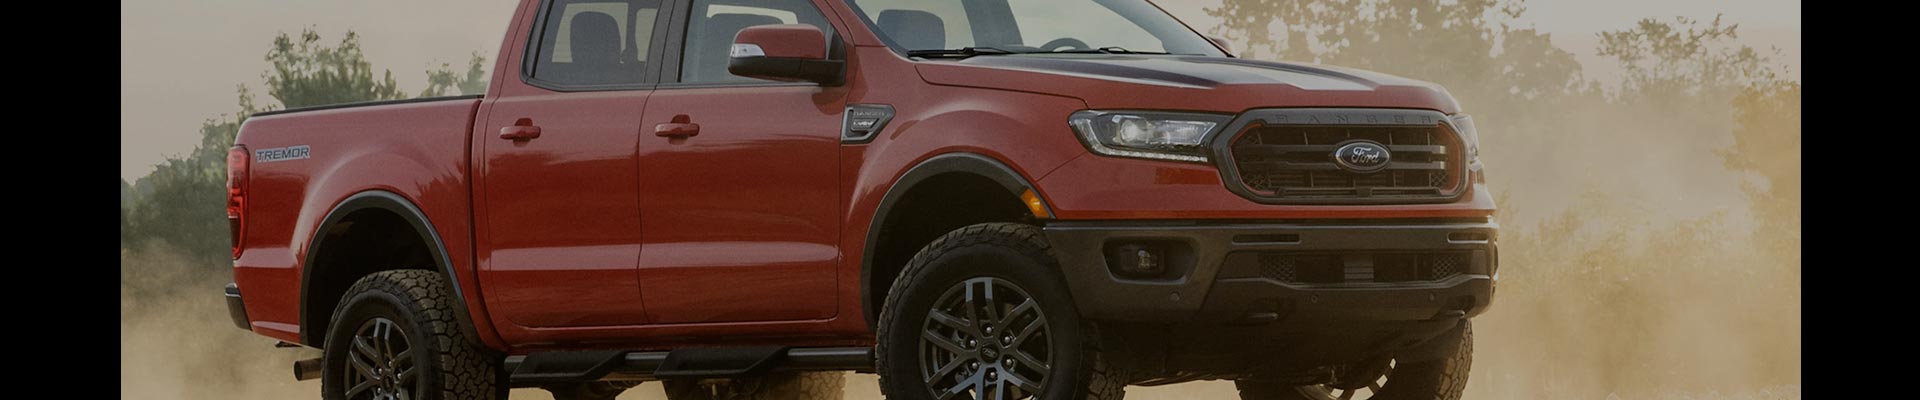 Shop Replacement and OEM 2010 Ford Ranger Parts with Discounted Price on the Net